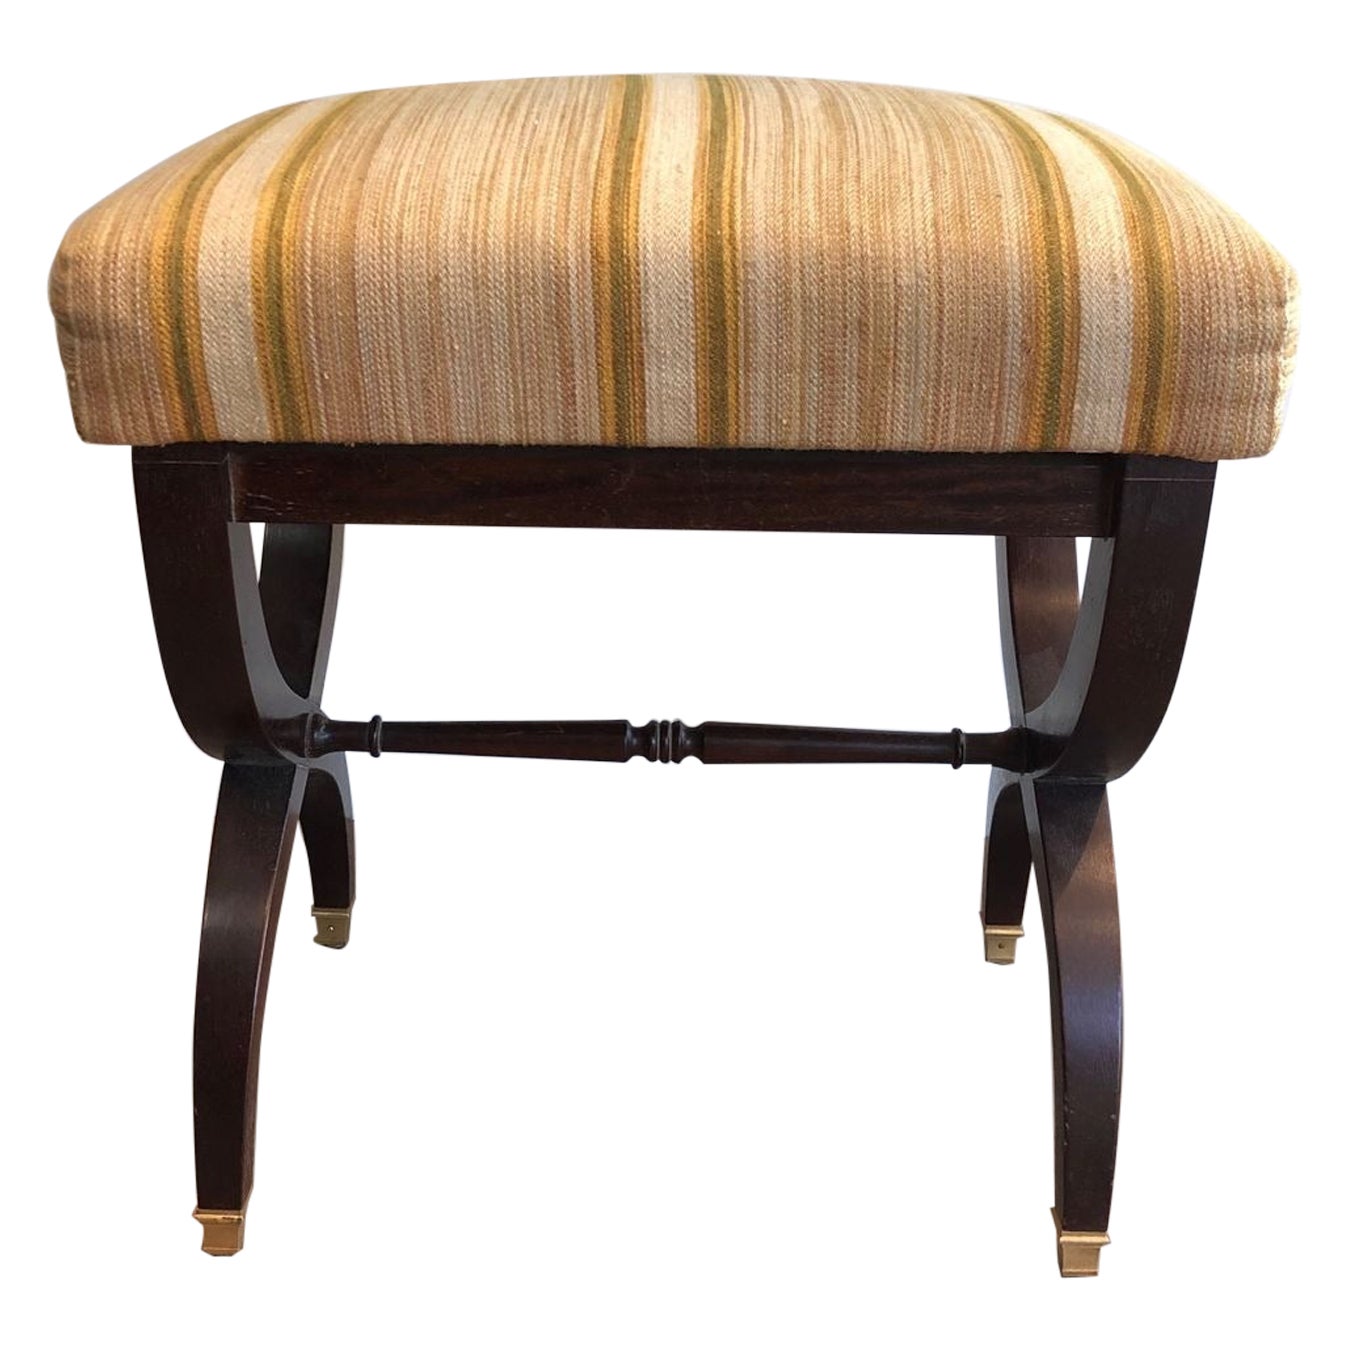 Neoclassical Style Wooden Stool, circa 1940